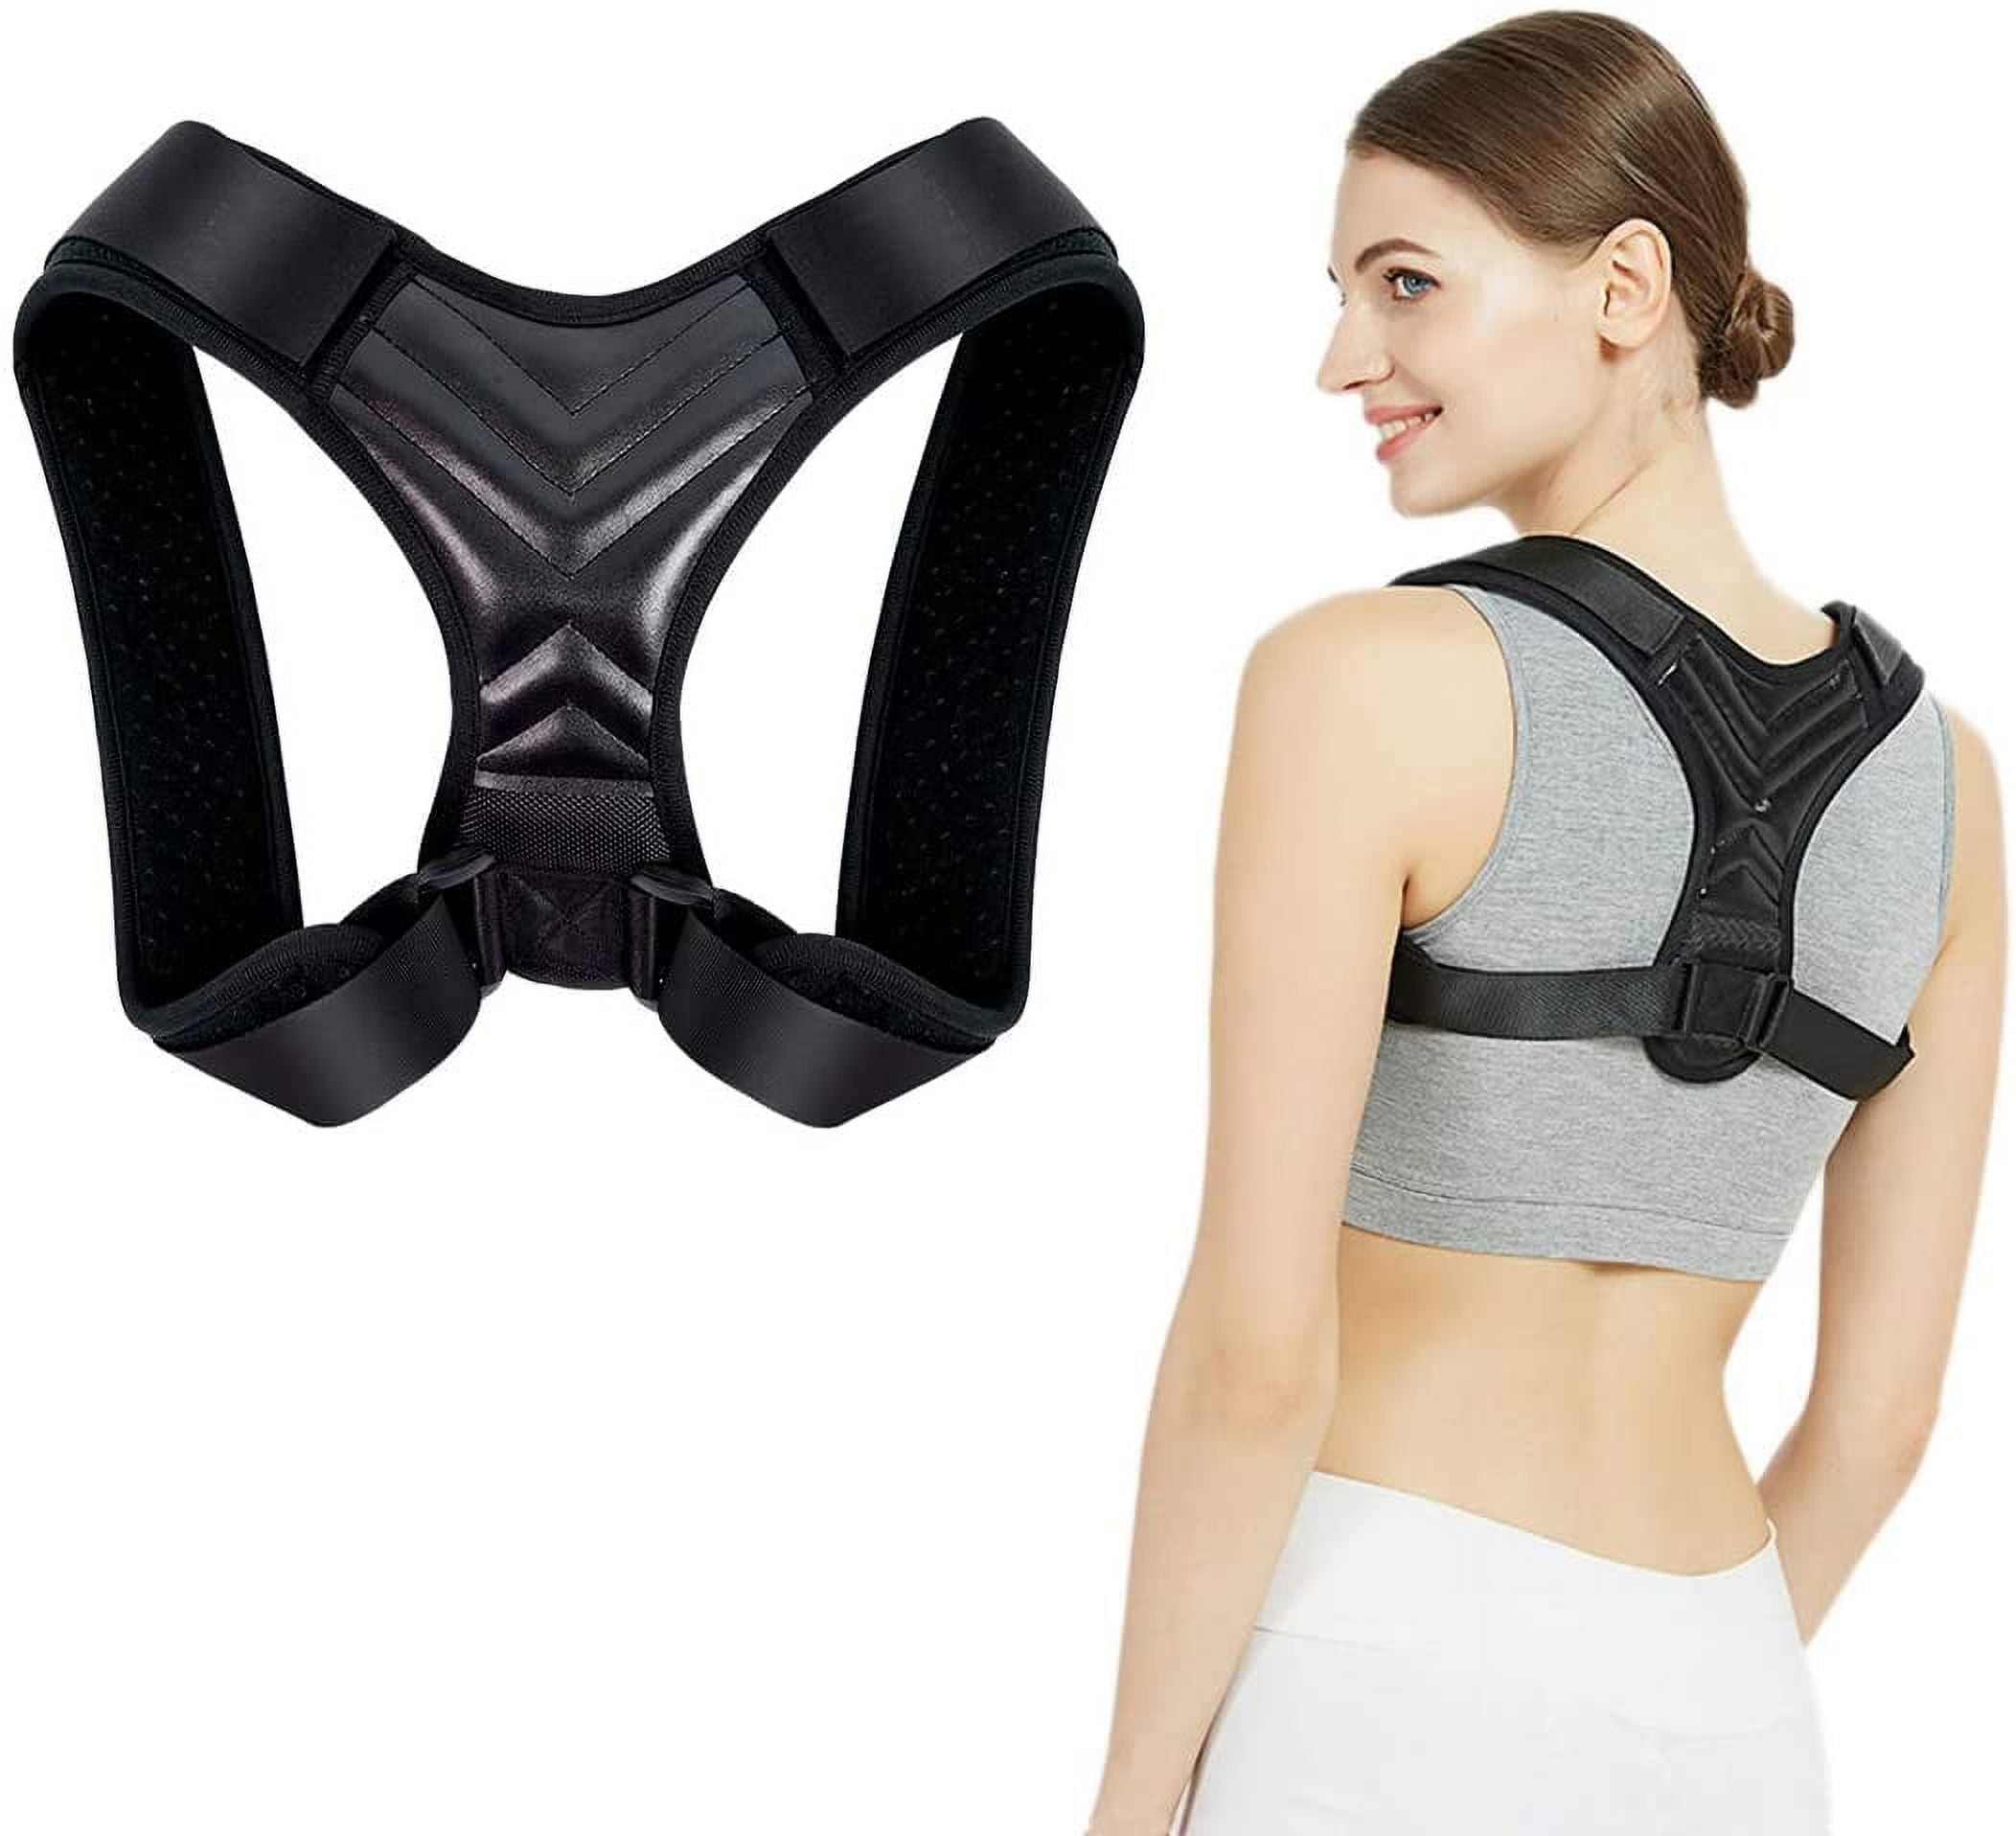 Posture Corrector for Men and Women, Upper Back Brace for Clavicle  Support,Adjustable Back Straightener and Providing Pain Relief from Neck,  Back and